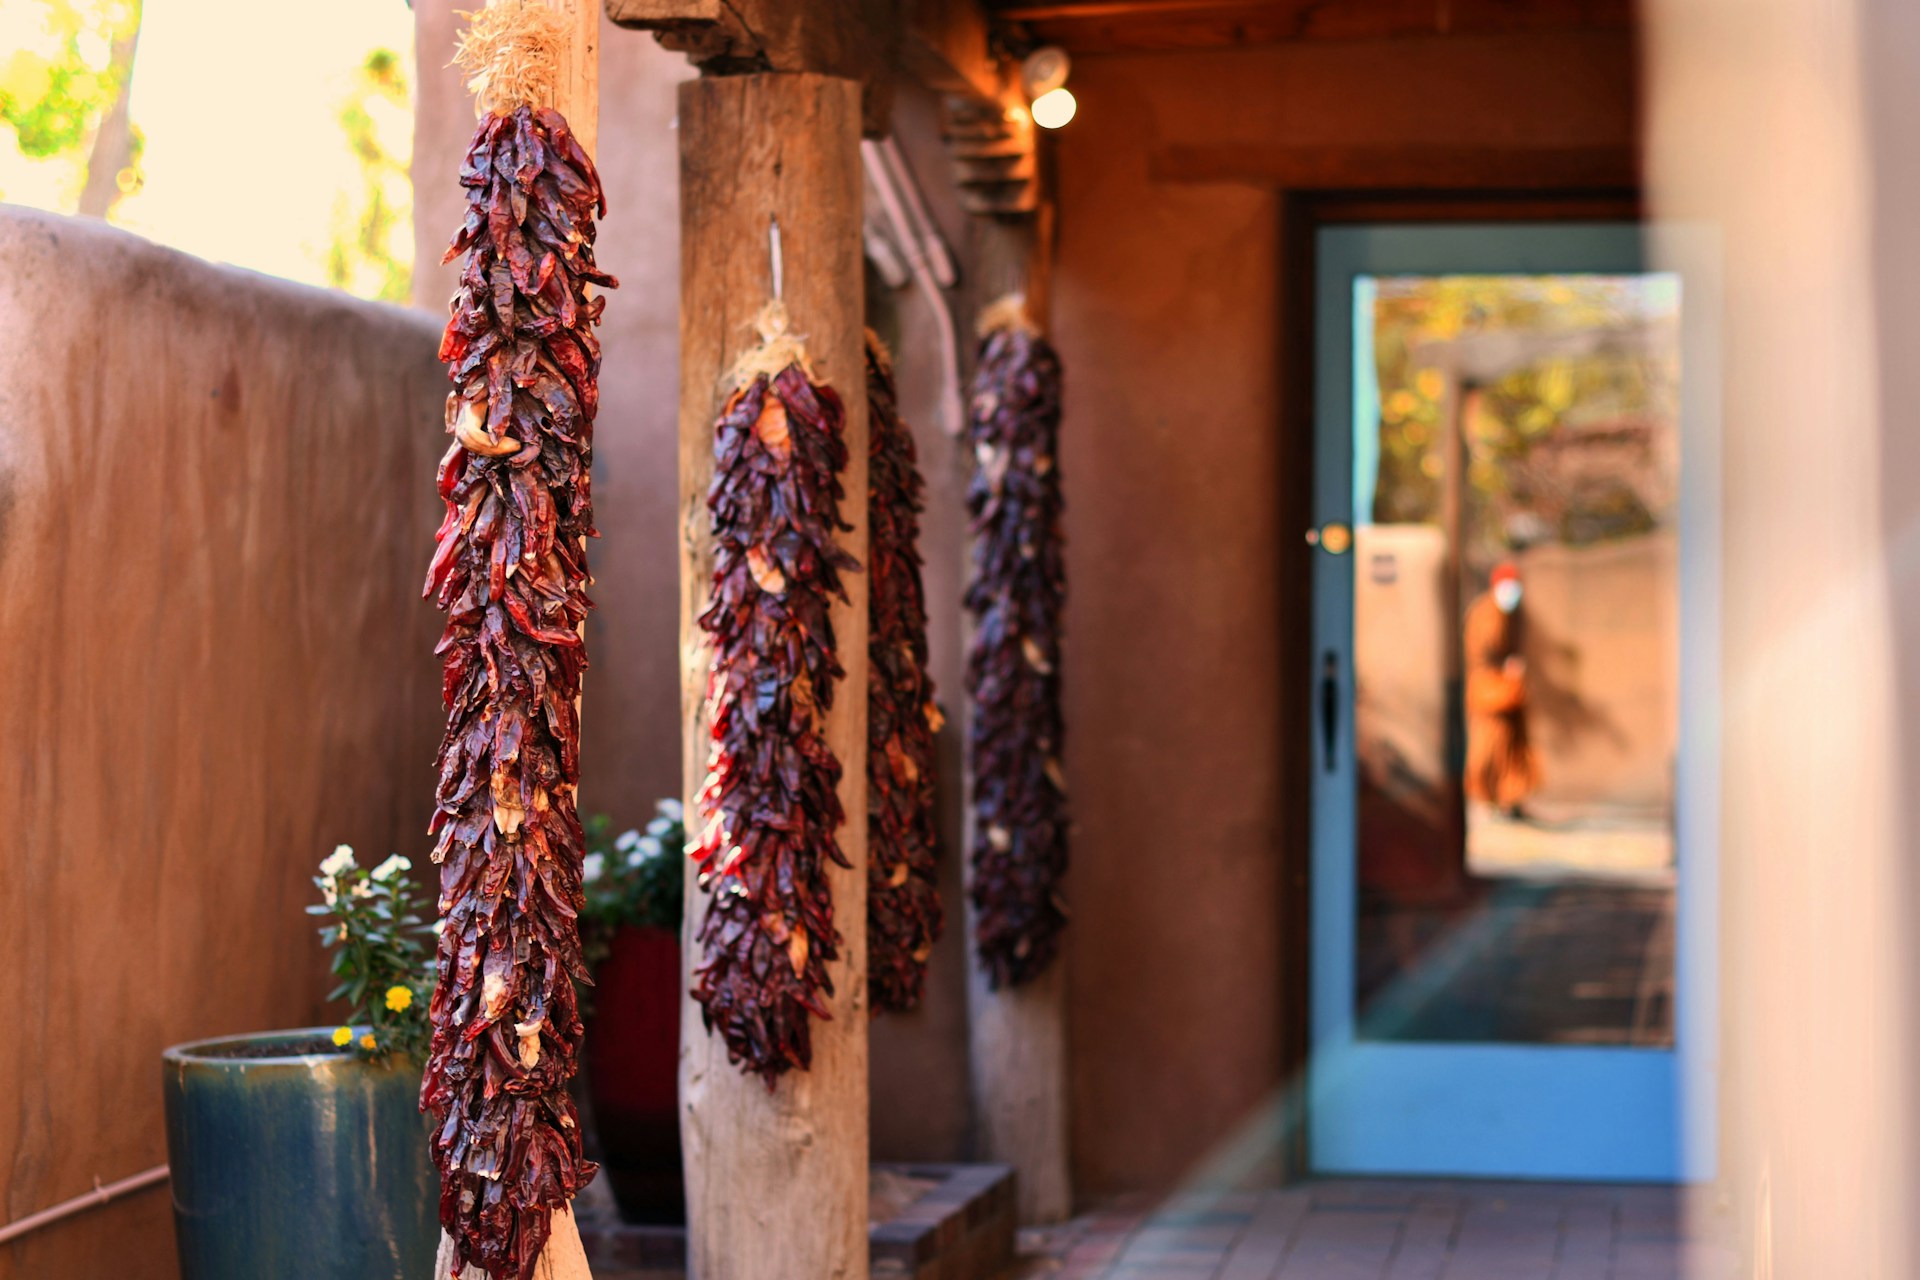 Dried red chiles hanging